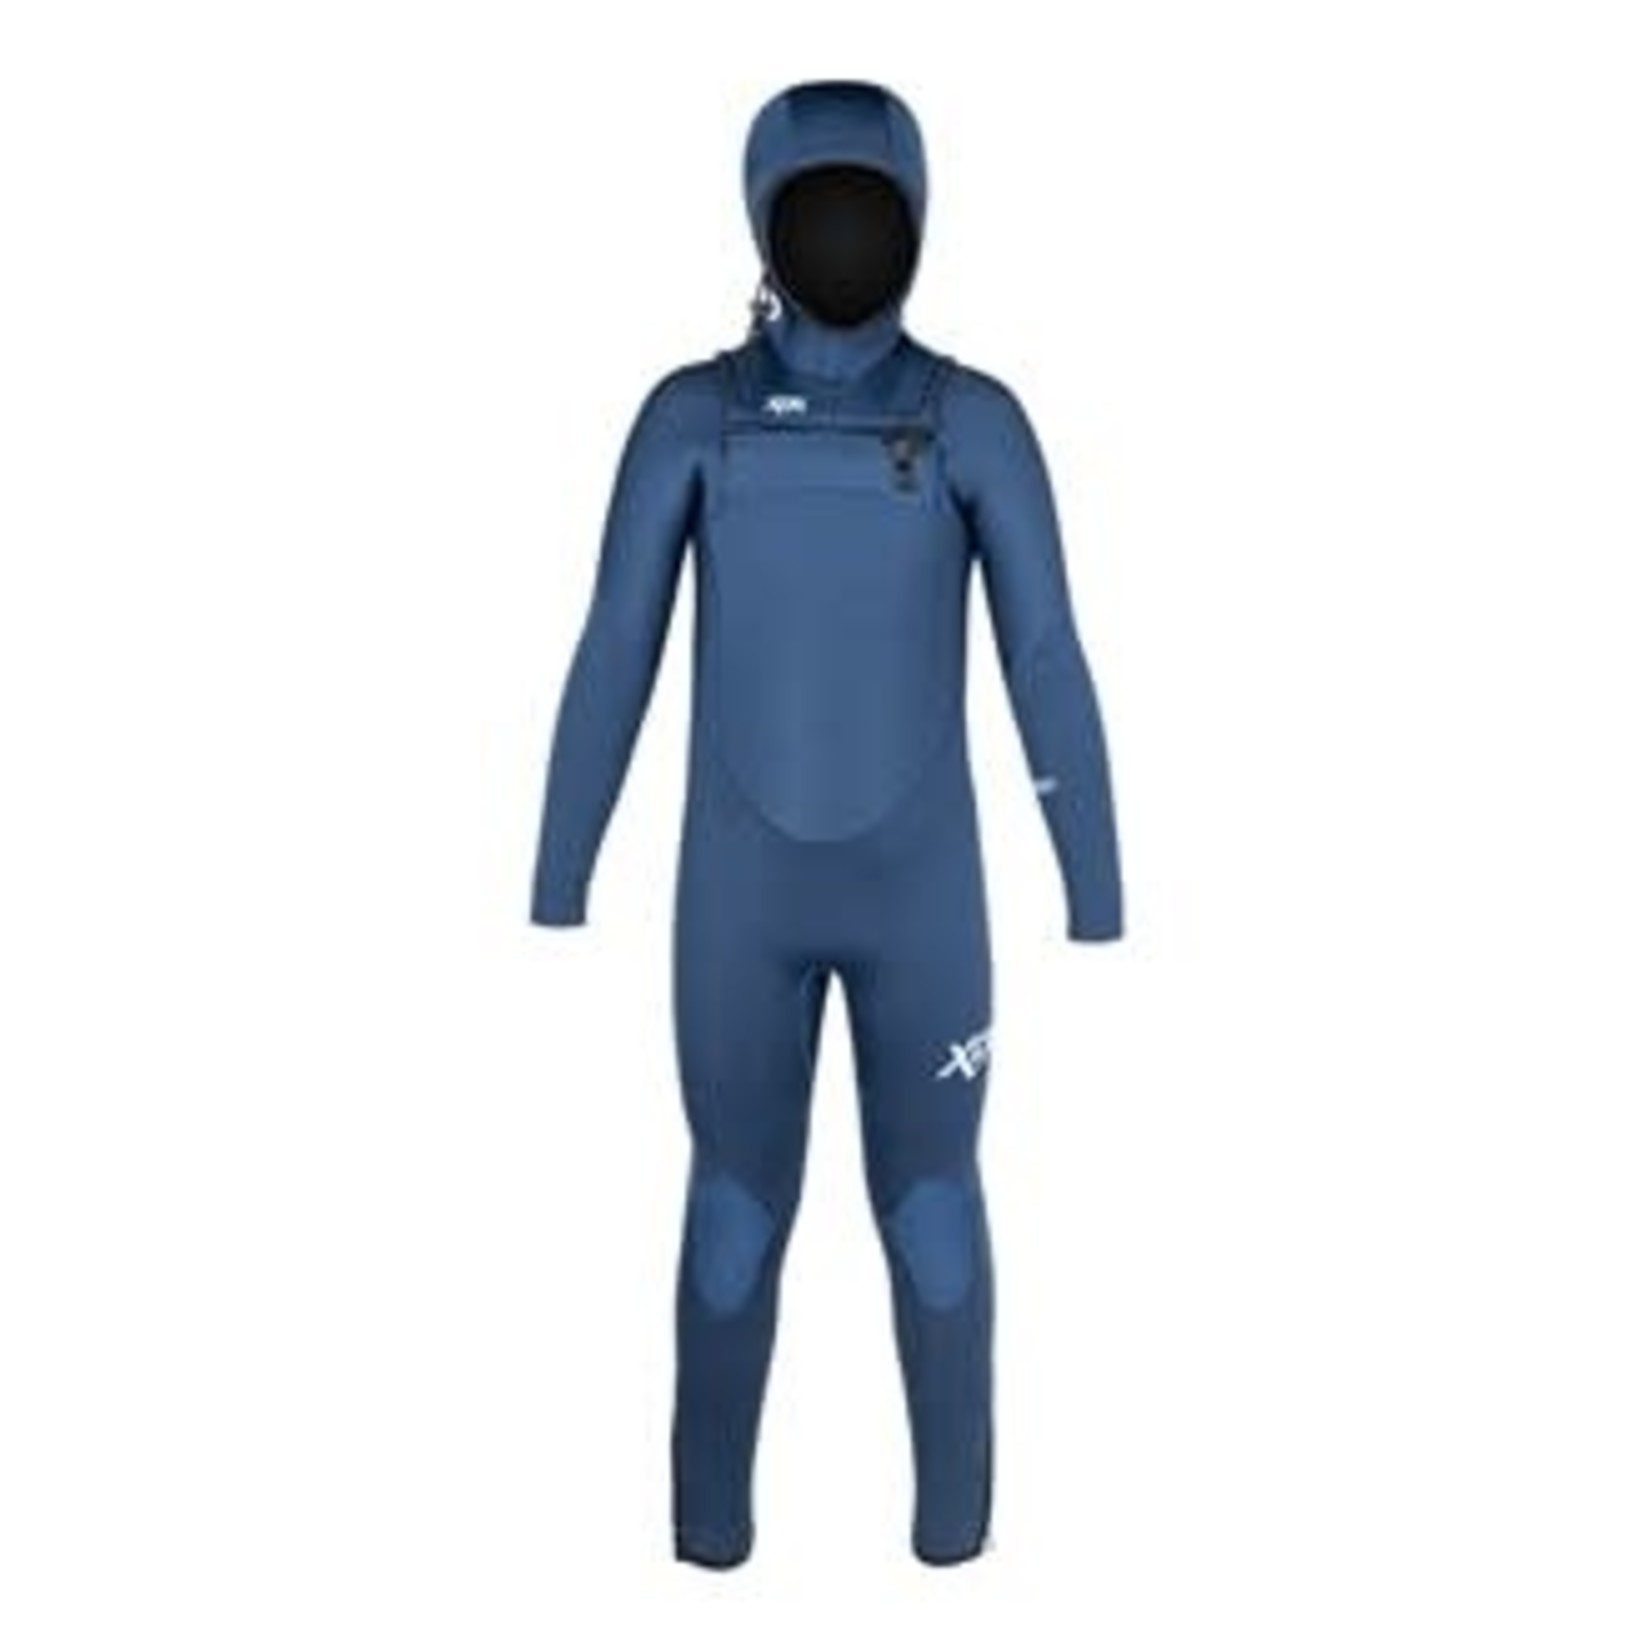 Xcel Youth comp 5/4 hooded fullsuit